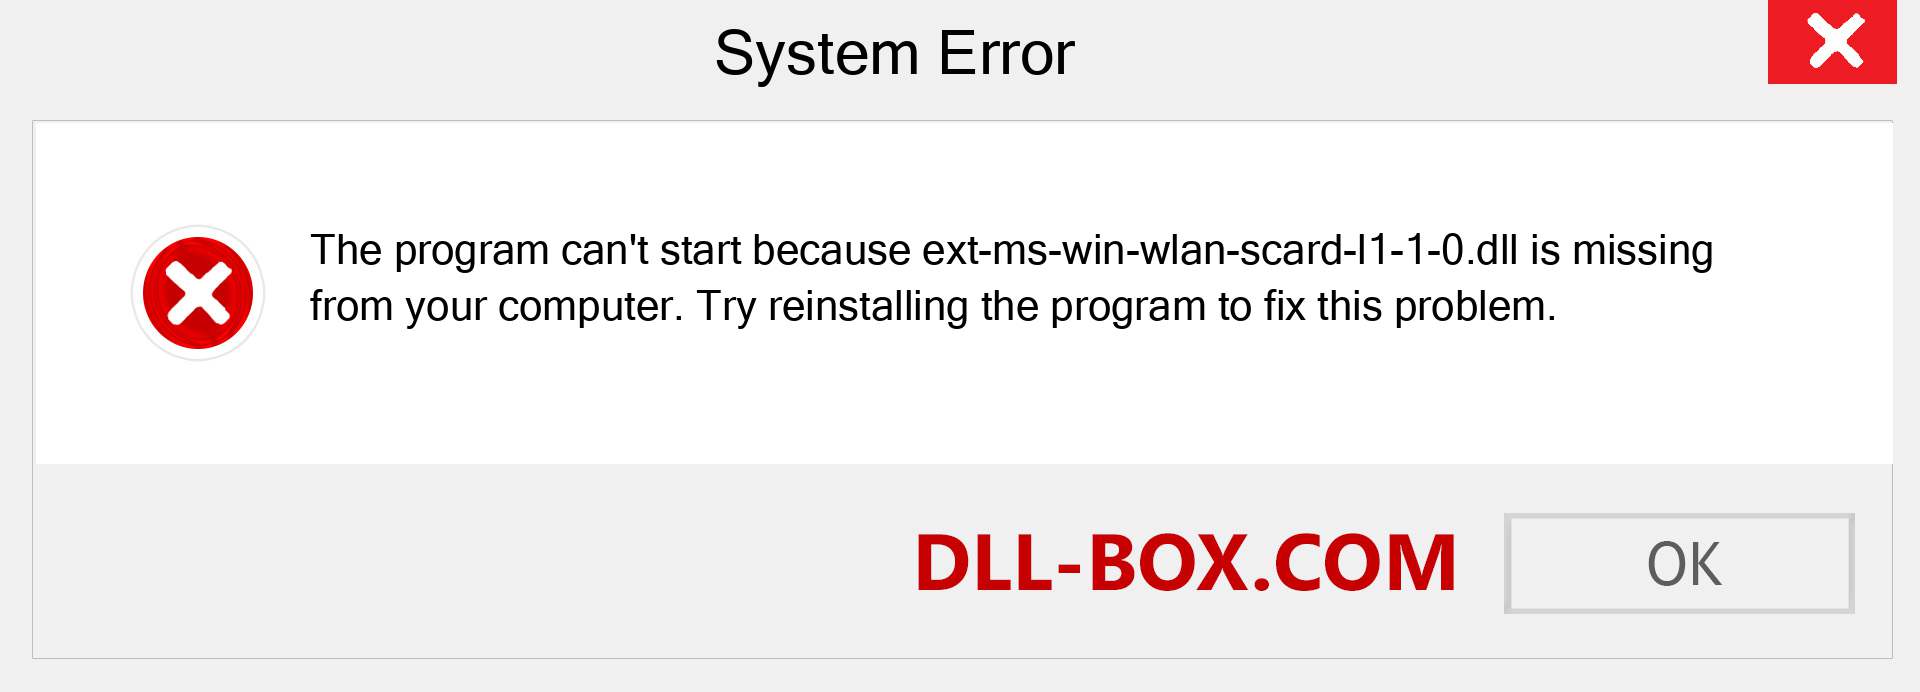  ext-ms-win-wlan-scard-l1-1-0.dll file is missing?. Download for Windows 7, 8, 10 - Fix  ext-ms-win-wlan-scard-l1-1-0 dll Missing Error on Windows, photos, images